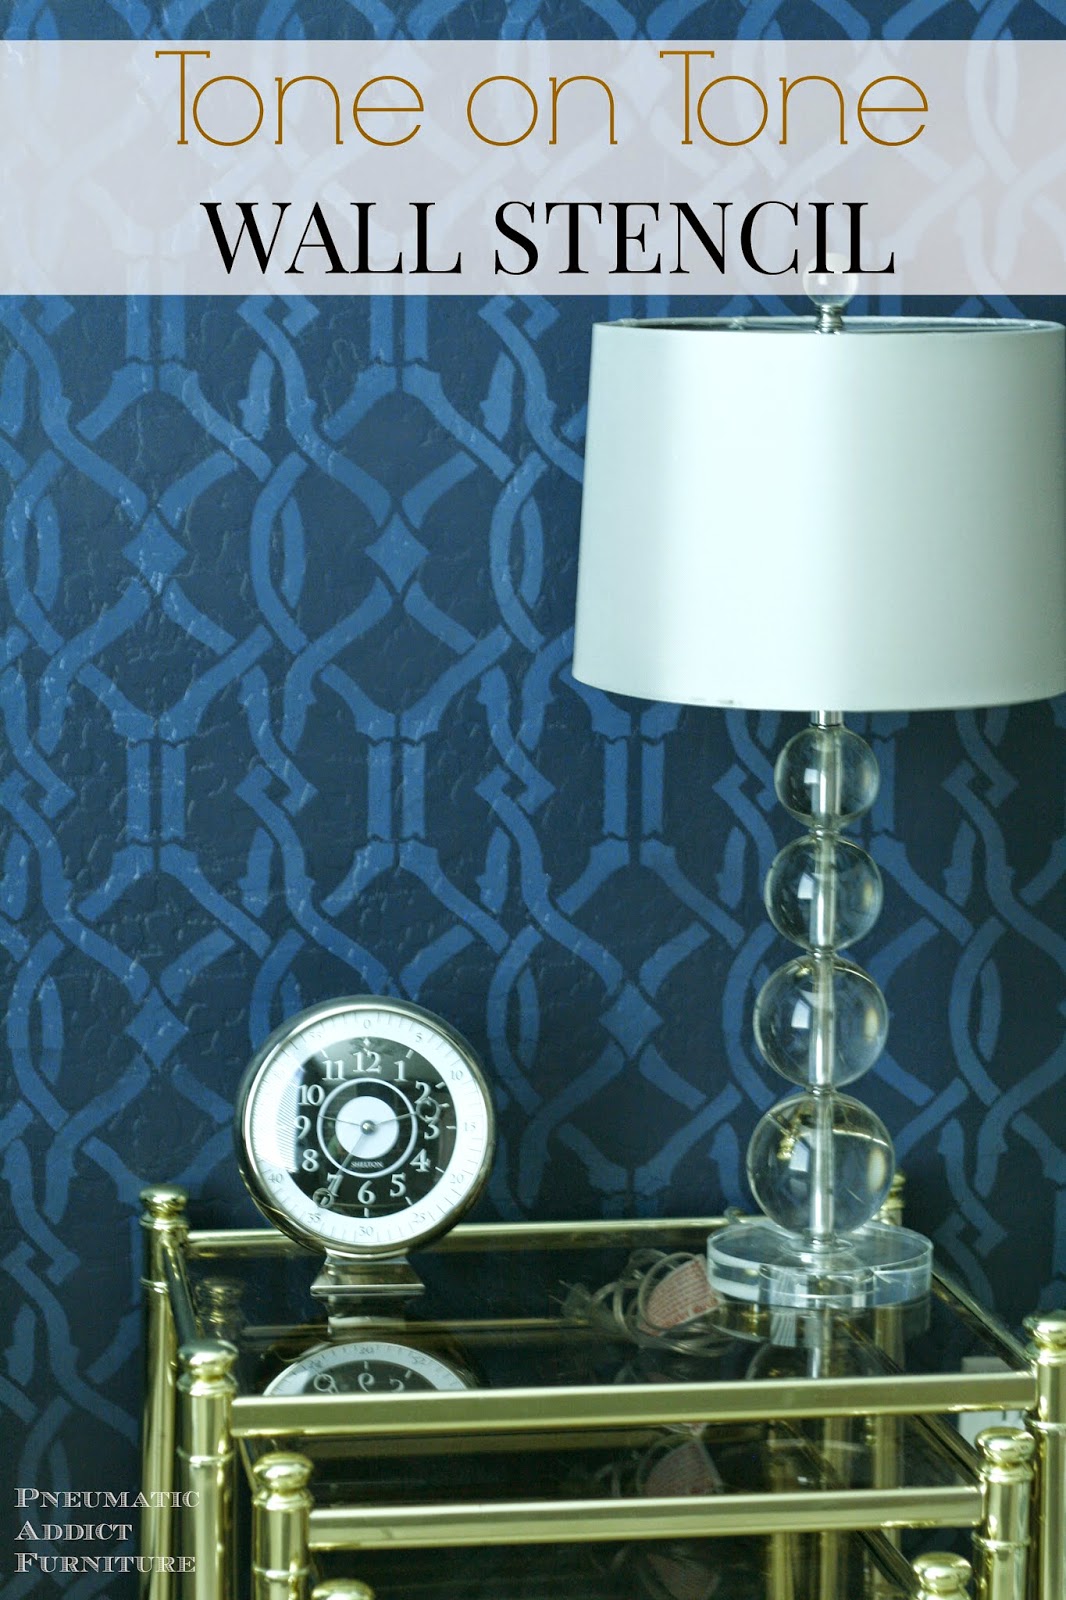 How to create a tone on tone pattern on a wall using a stencil